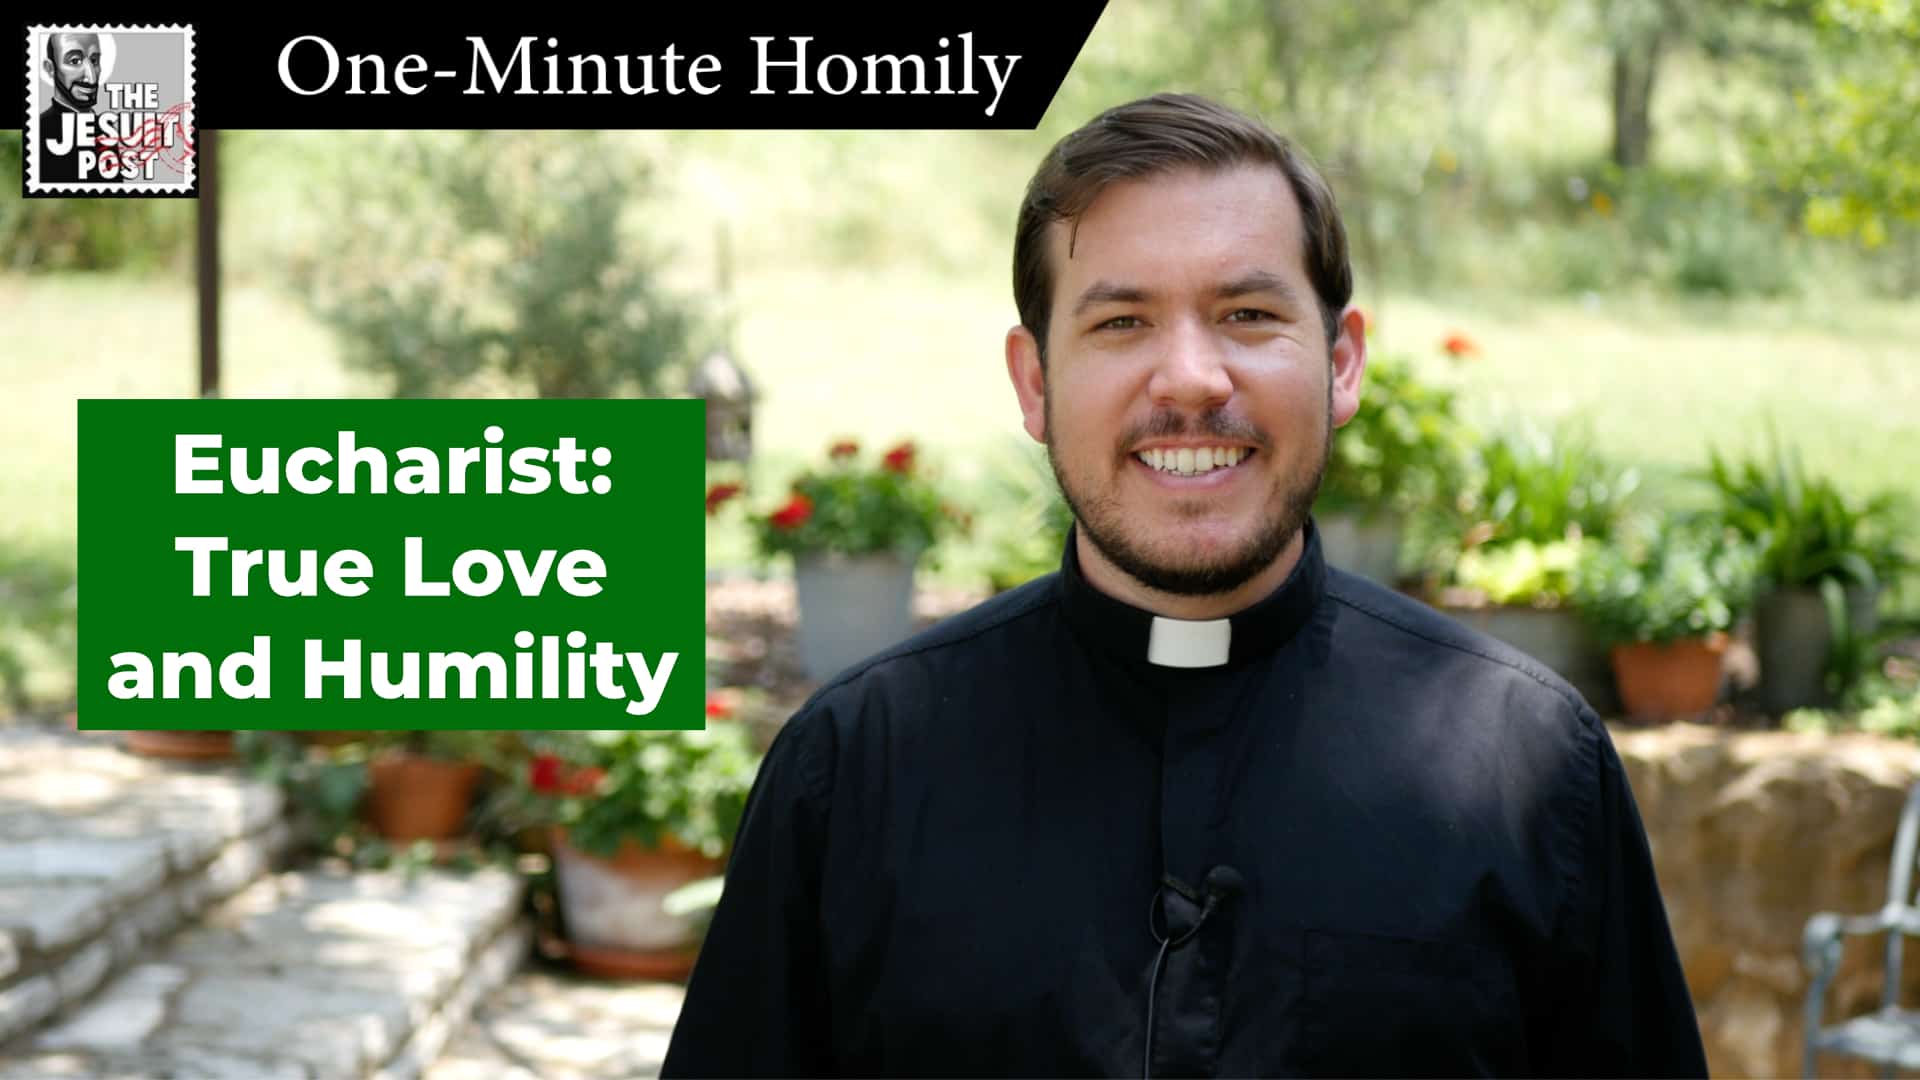 One-Minute Homily: “Eucharist: True Love and Humility”